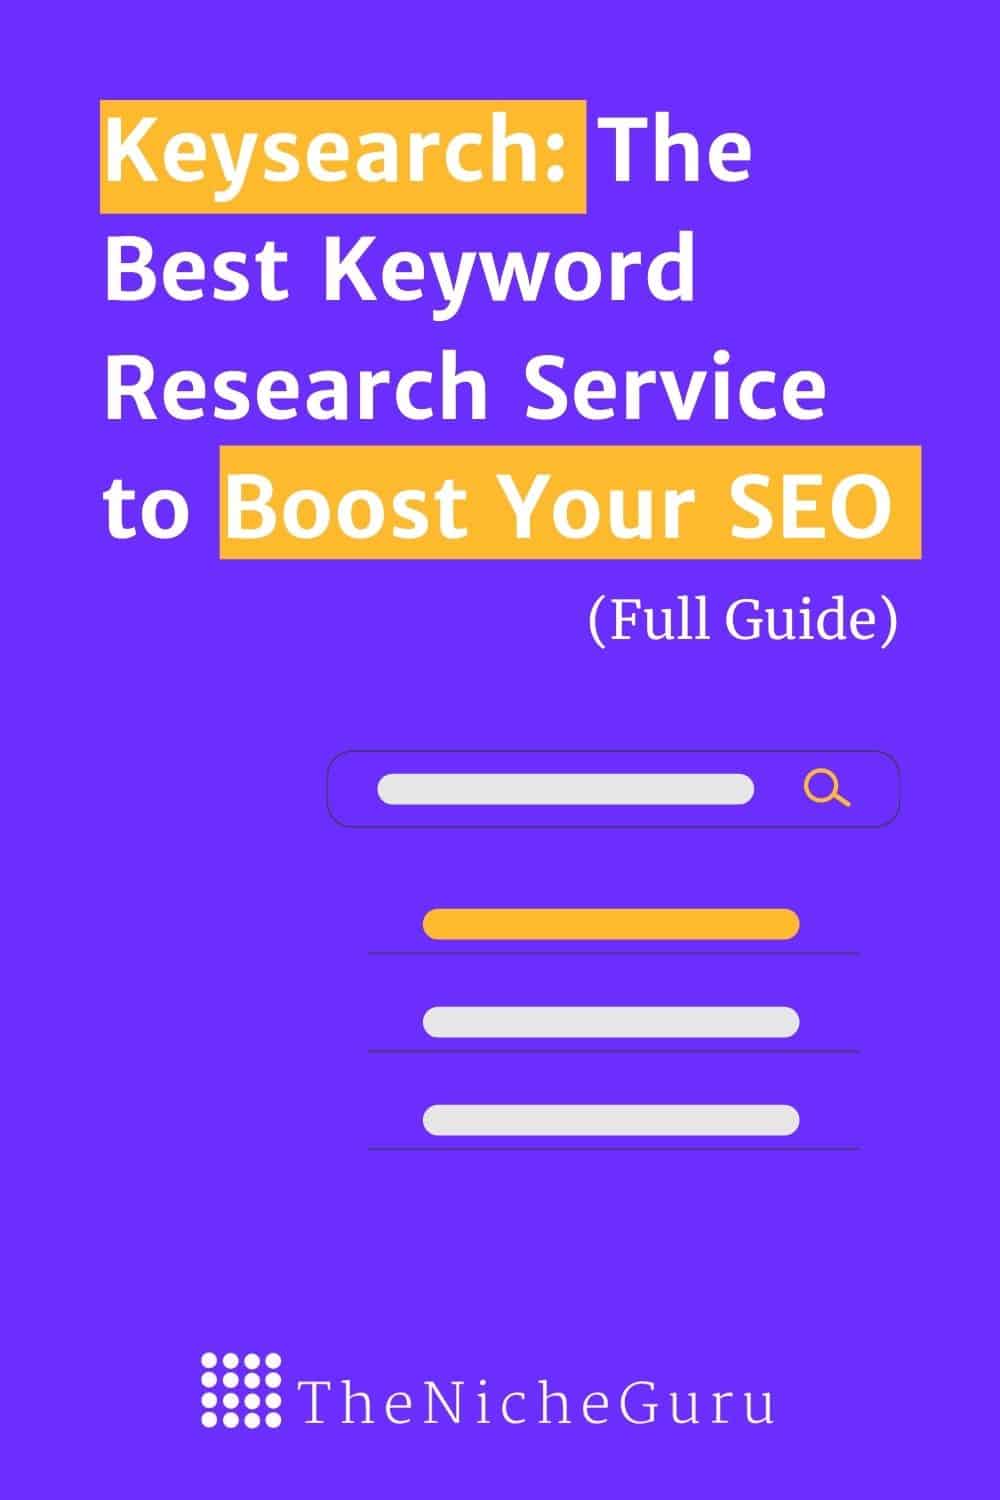 Here's the Best Keyword Research Service for Bloggers to grow your website traffic and climb Google rankings. Full guide on how to perform keyword research using Keysearch and help your website search engine optimization to drive targeted traffic to your site. Learn how long tail keywords can get you onto page 1 in Google. #SEO #KeywordResearch #Keywords #KeywordTools #KeywordServices